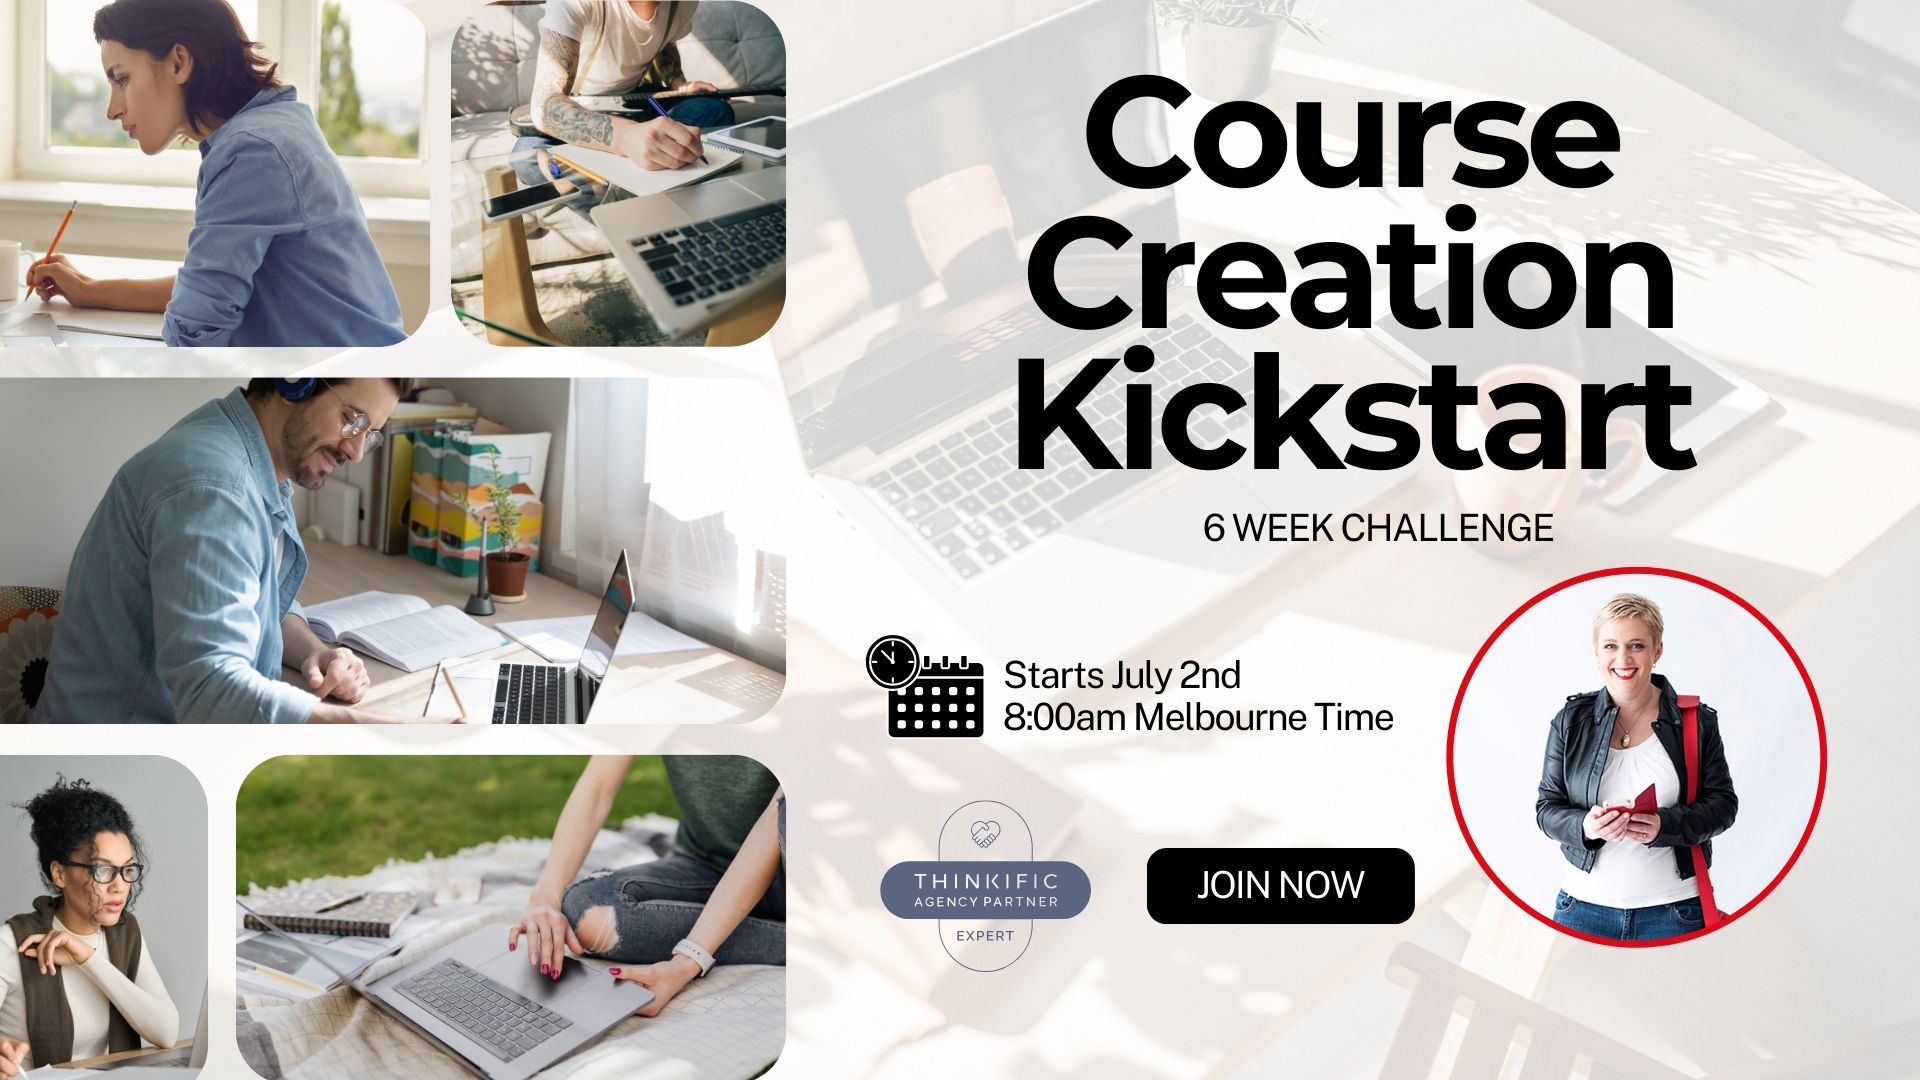 Kickstart your course creation journey with our comprehensive program. Whether you're a newbie in the field or an experienced instructor looking to enhance your skills, our course creation kickstart is designed to provide you with